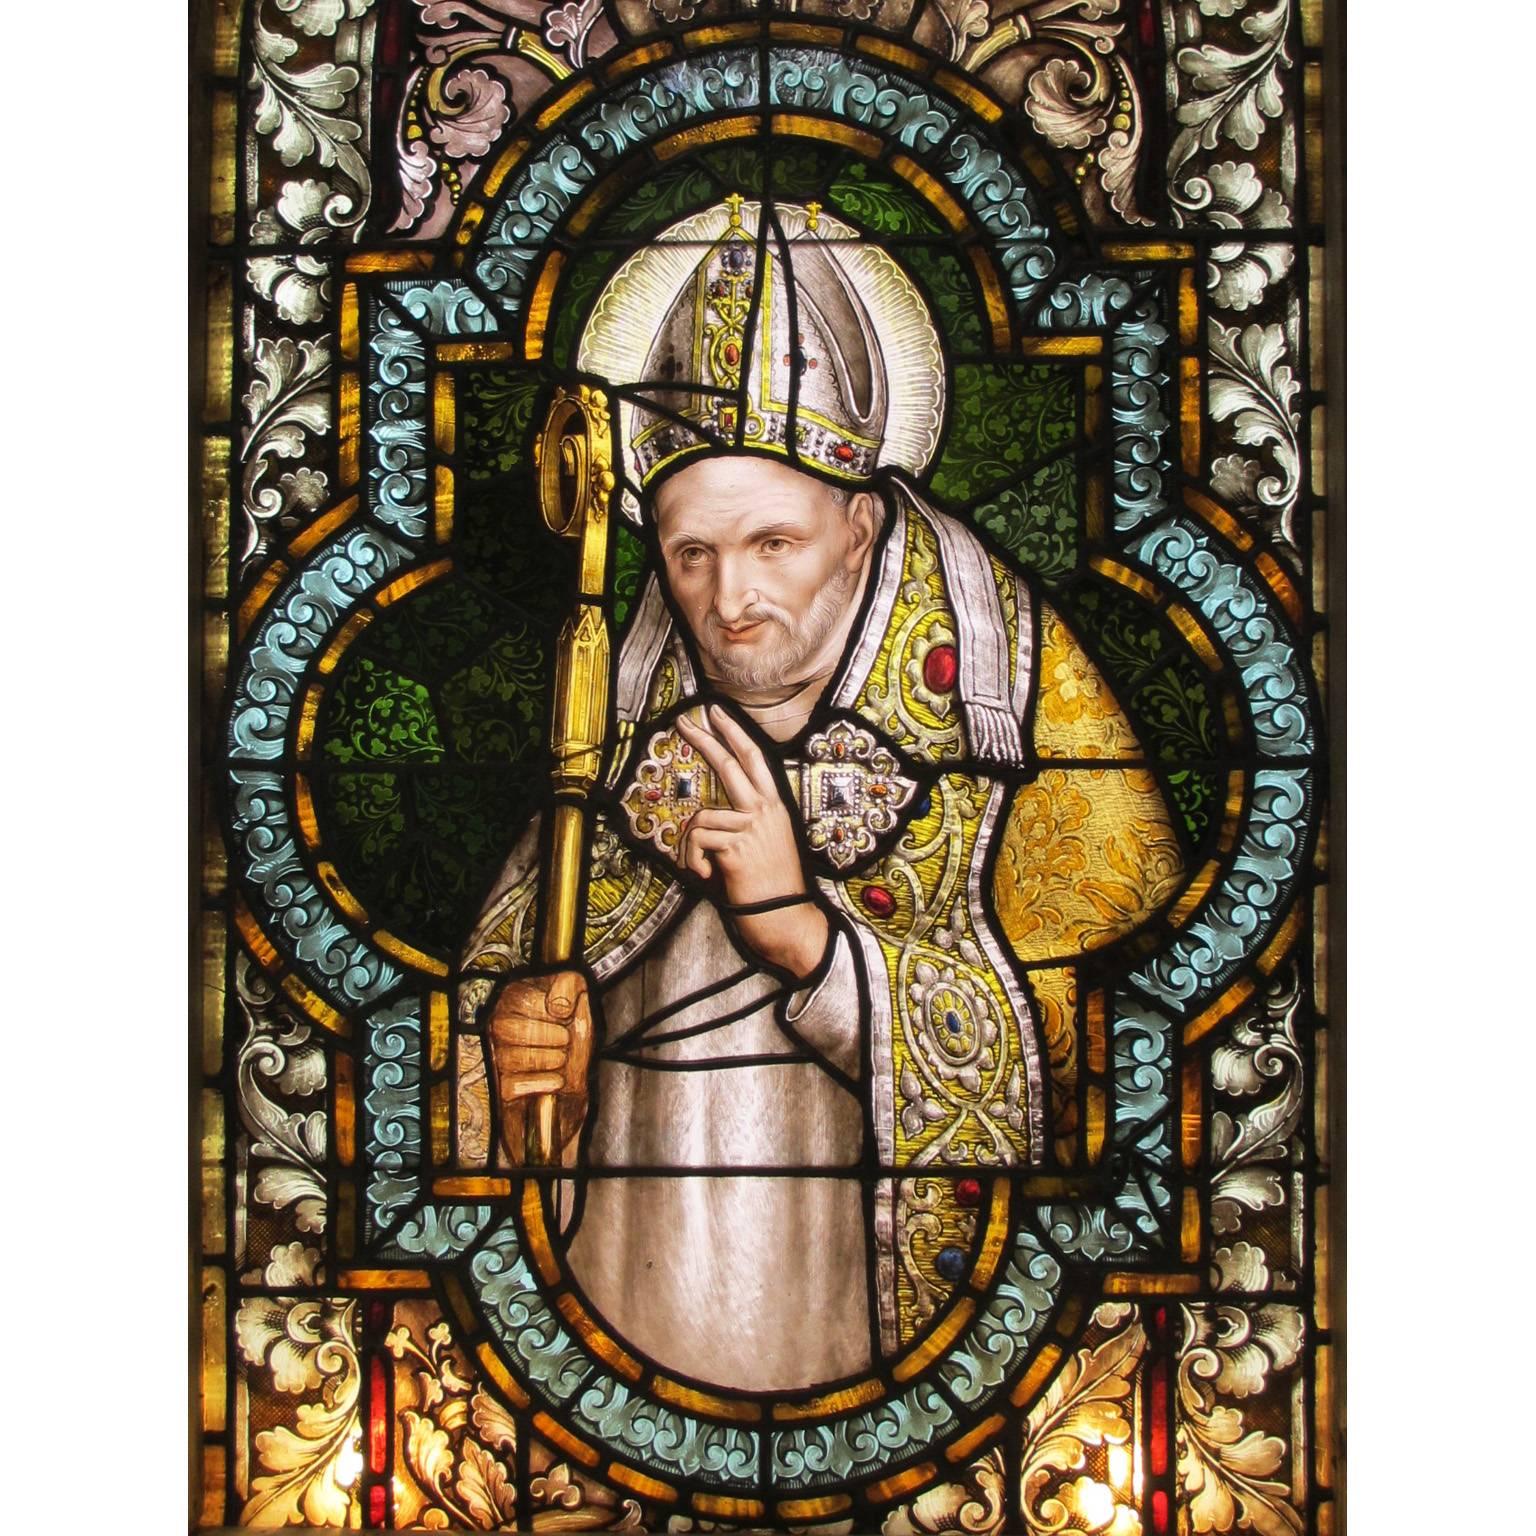 A fine and rare Italian 19th-20th century framed stained glass panel depicting a pope, probably from the Vatican workshop. (Electrified,) circa 1900.

Stained glass height: 56 1/2 inches (143.5 cm.)
Stained glass width: 32 inches (81.3 cm.)
Frame